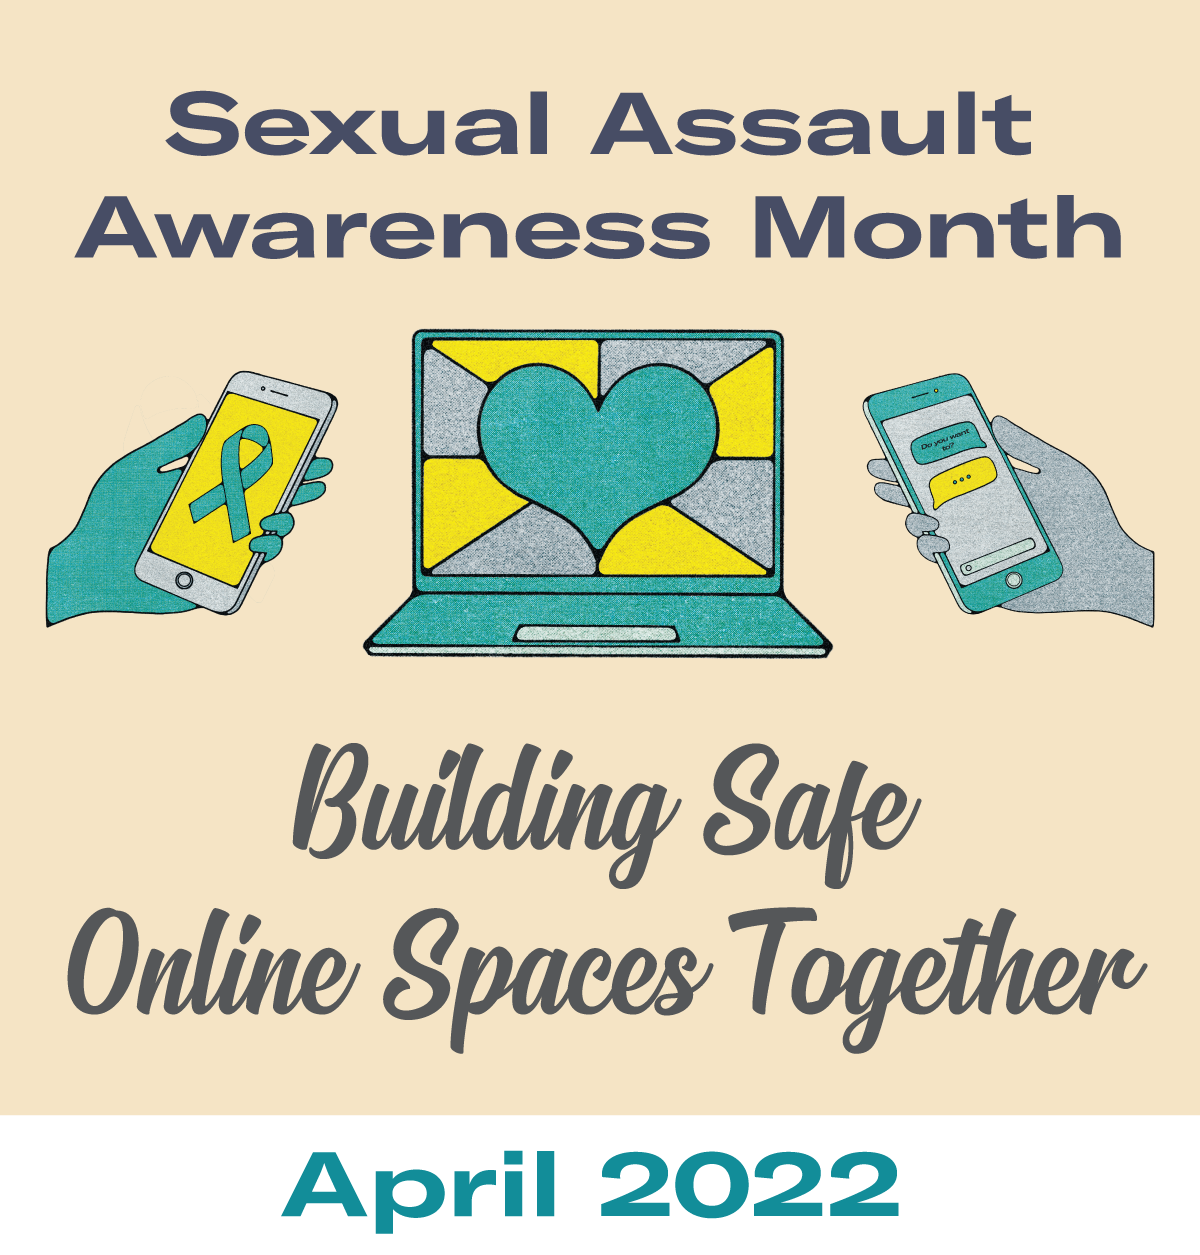 poster showing a computer and two mobile devices for sexual assault awareness month